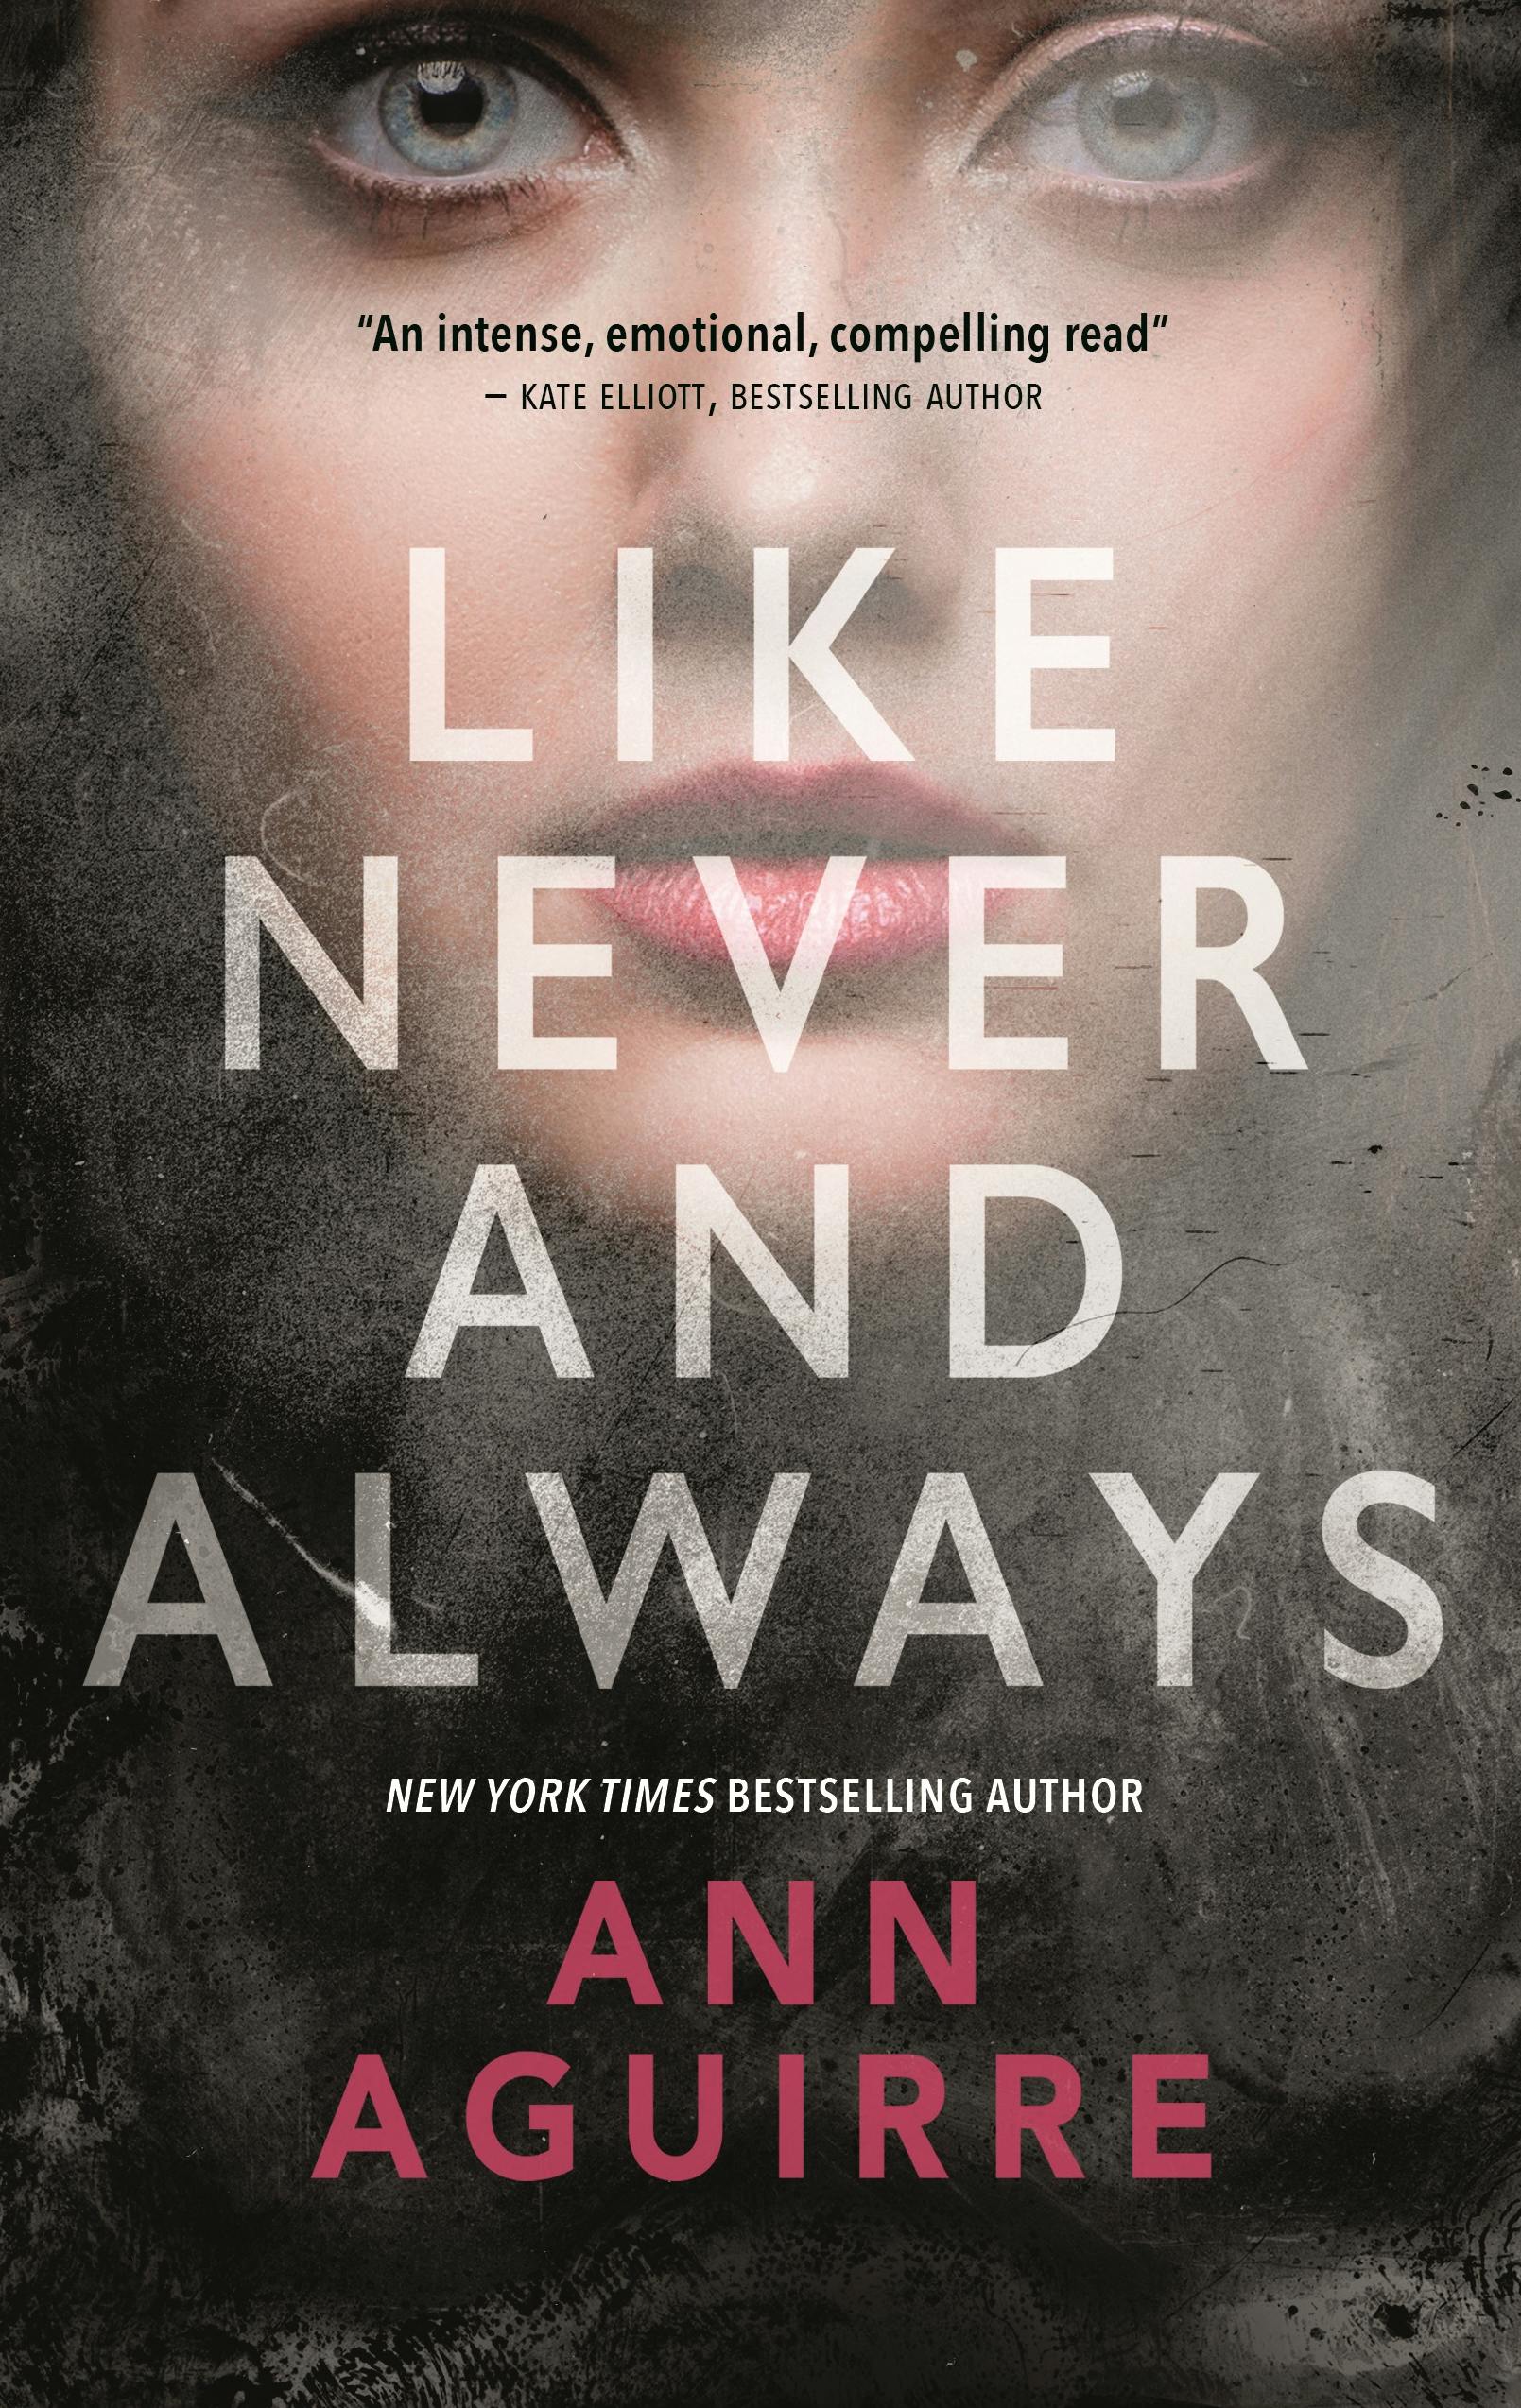 Cover for the book titled as: Like Never and Always